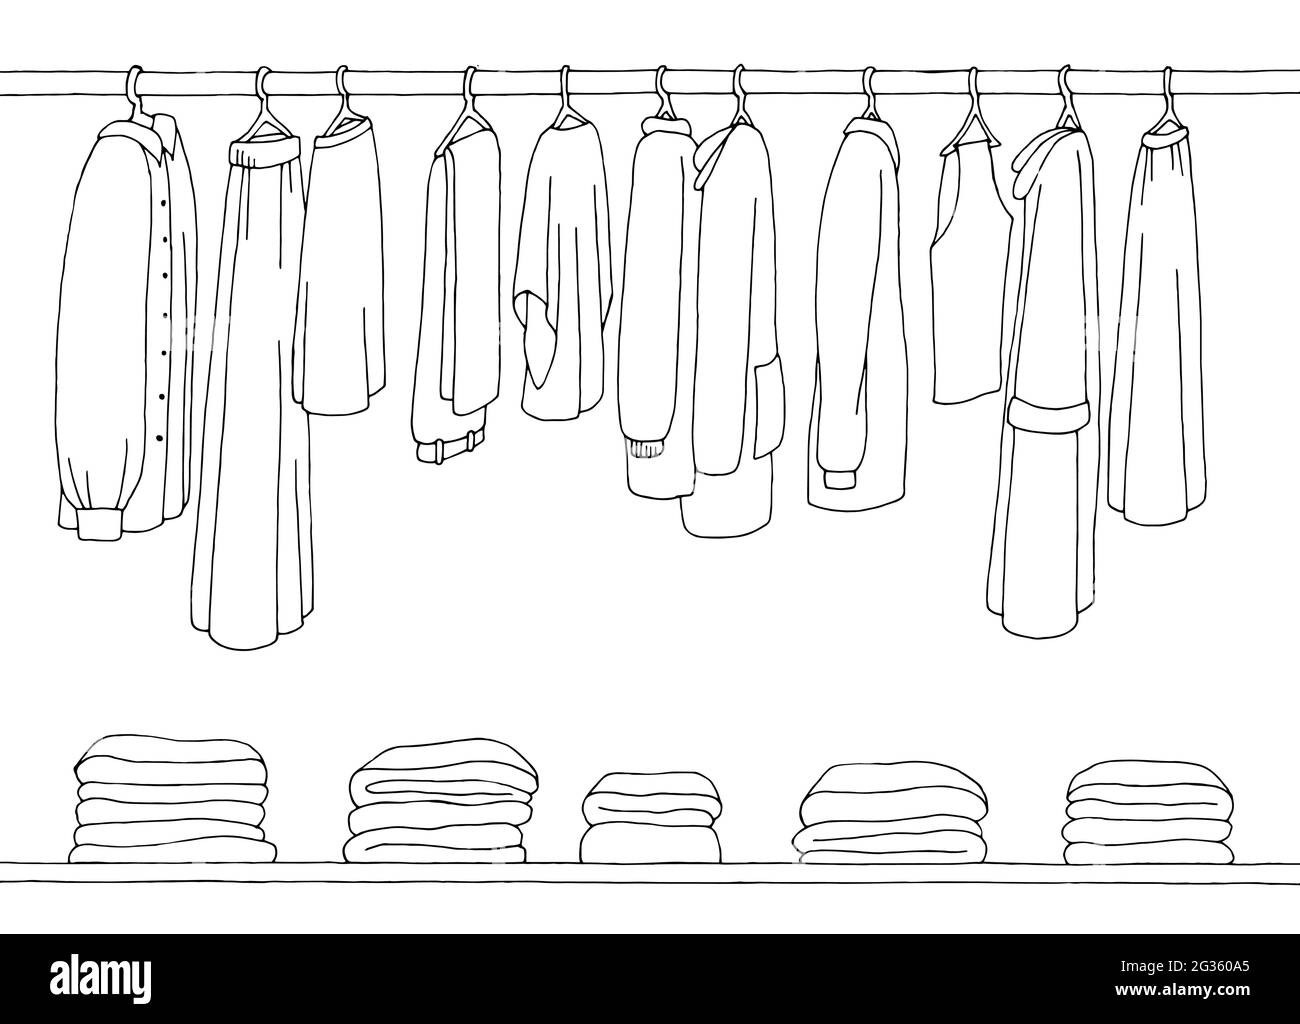 Clothes on hanger graphic black white isolated sketch illustration vector Stock Vector